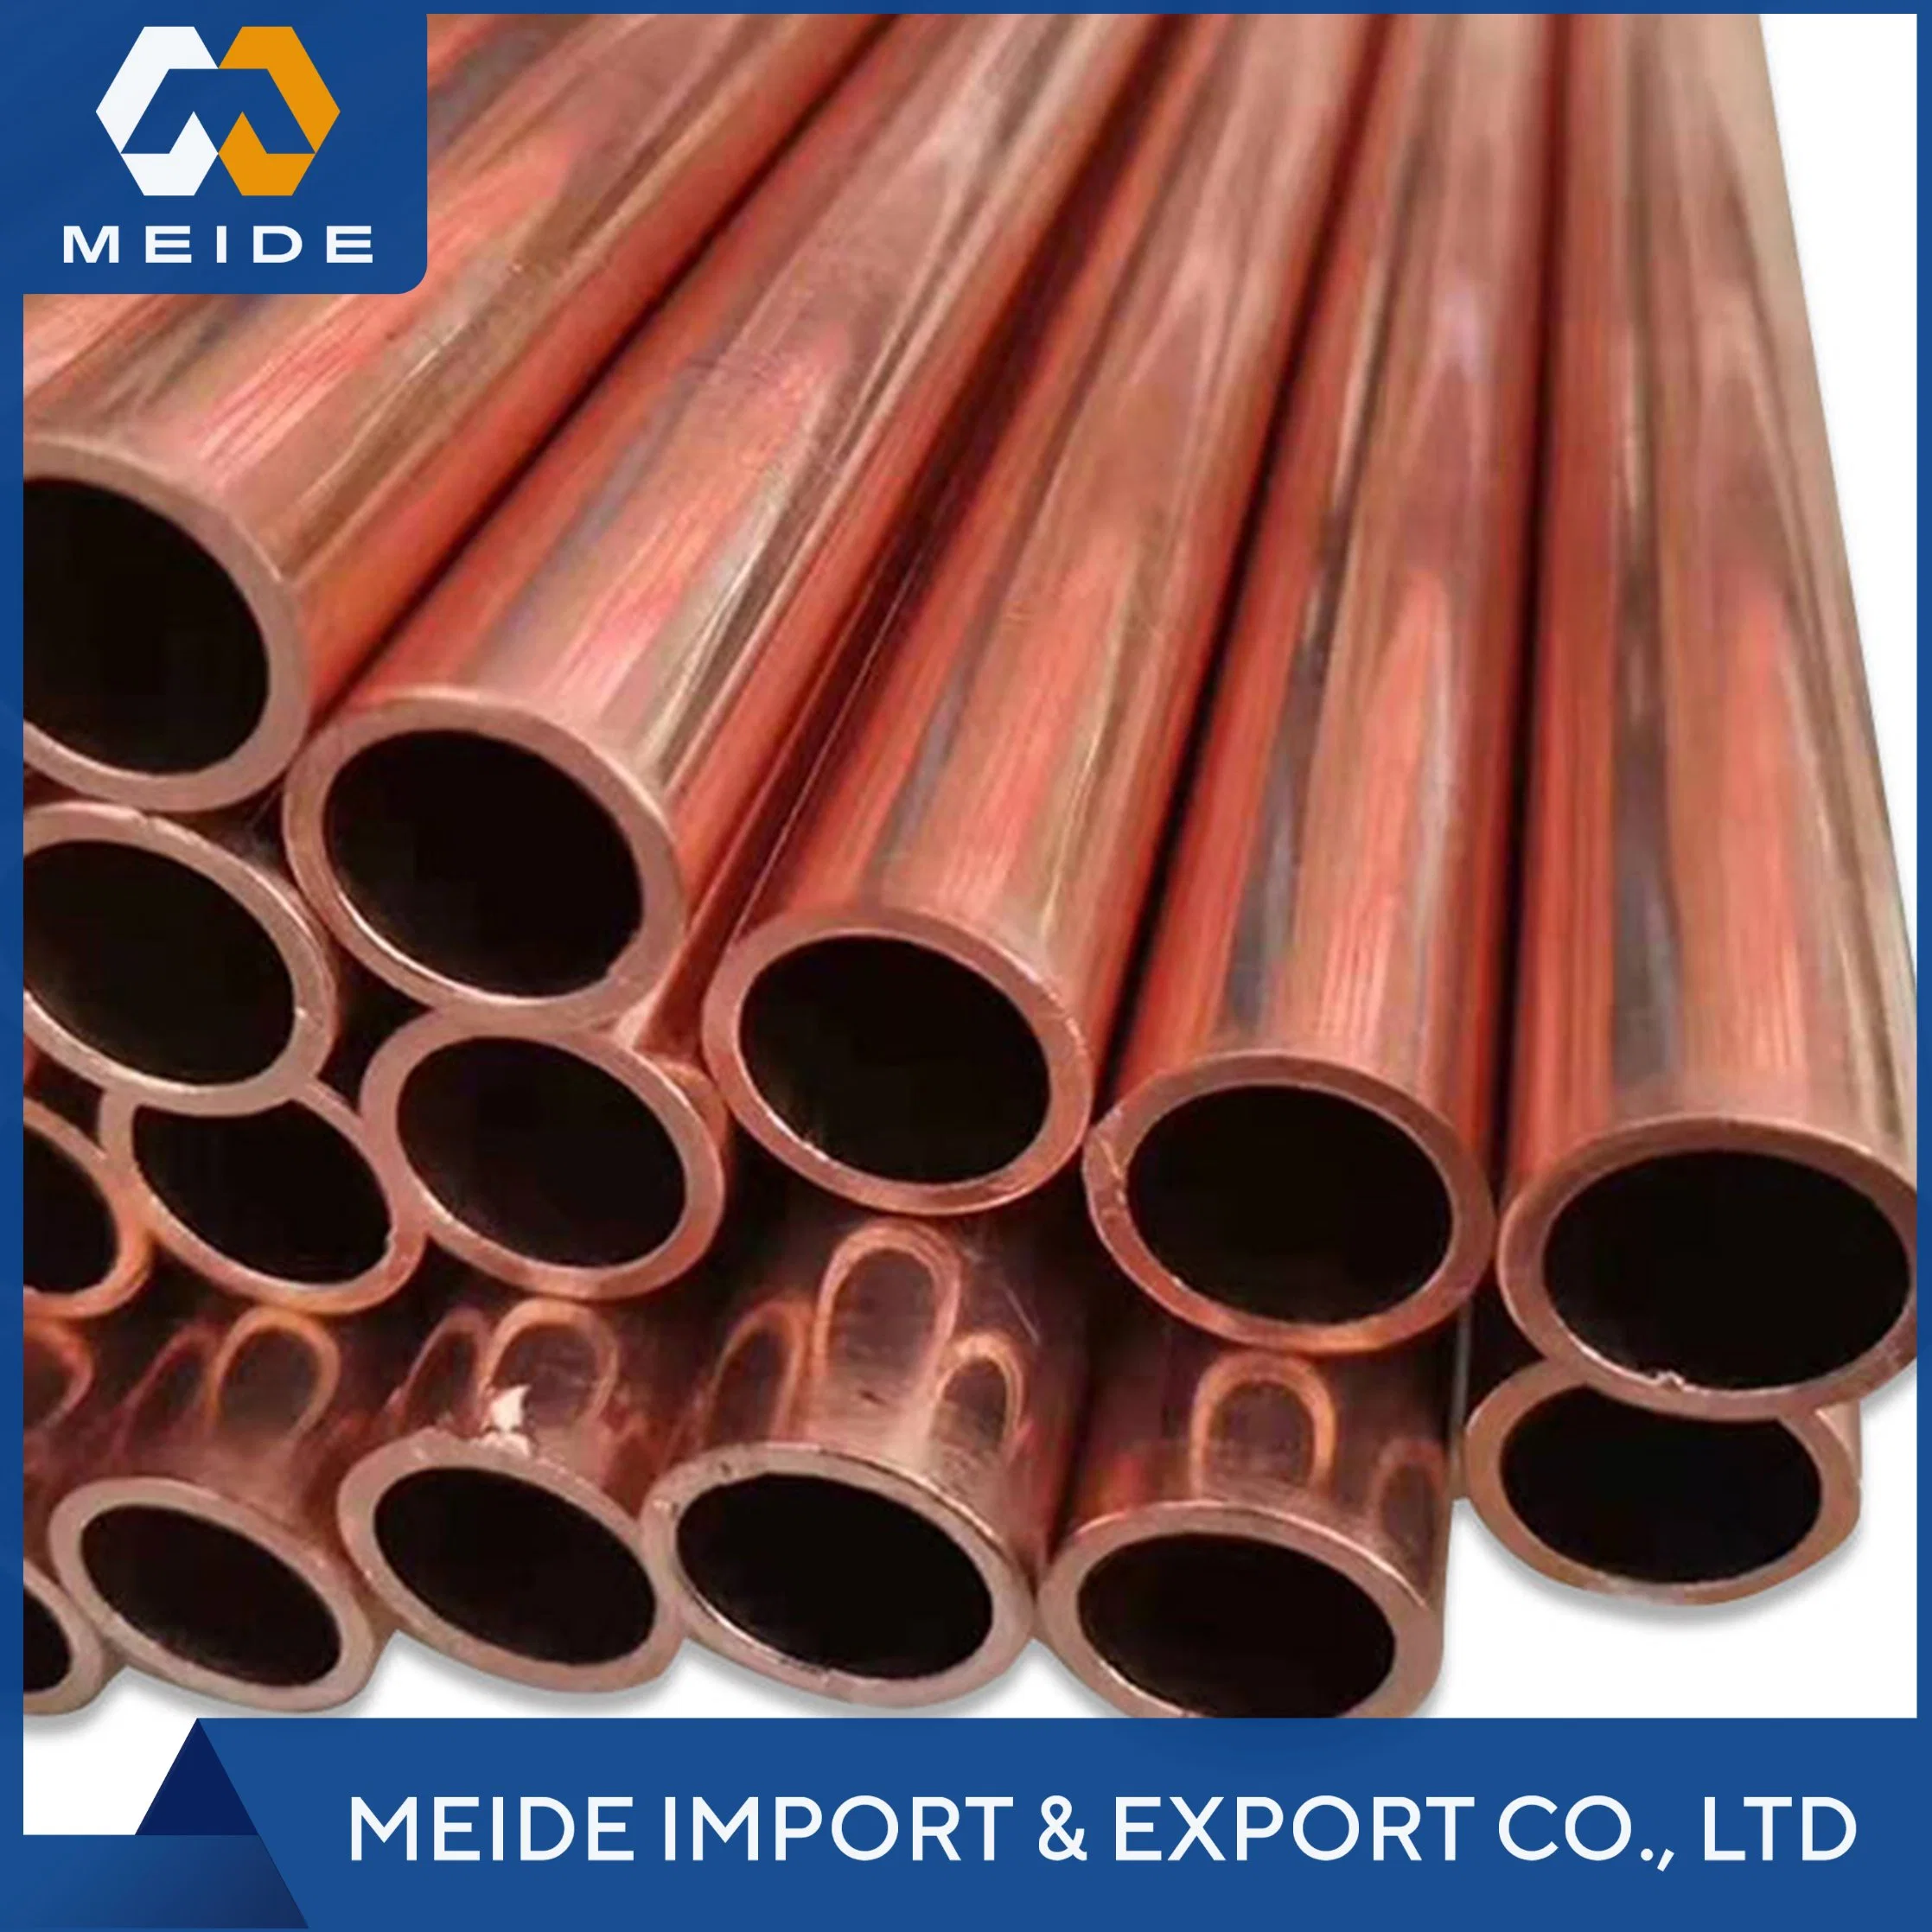 Factory Wholesale Price H96 H90 H85 H80 H70 H68 H65 H63 Soft Tempered Refrigerated Pancake Coil Copper Tube